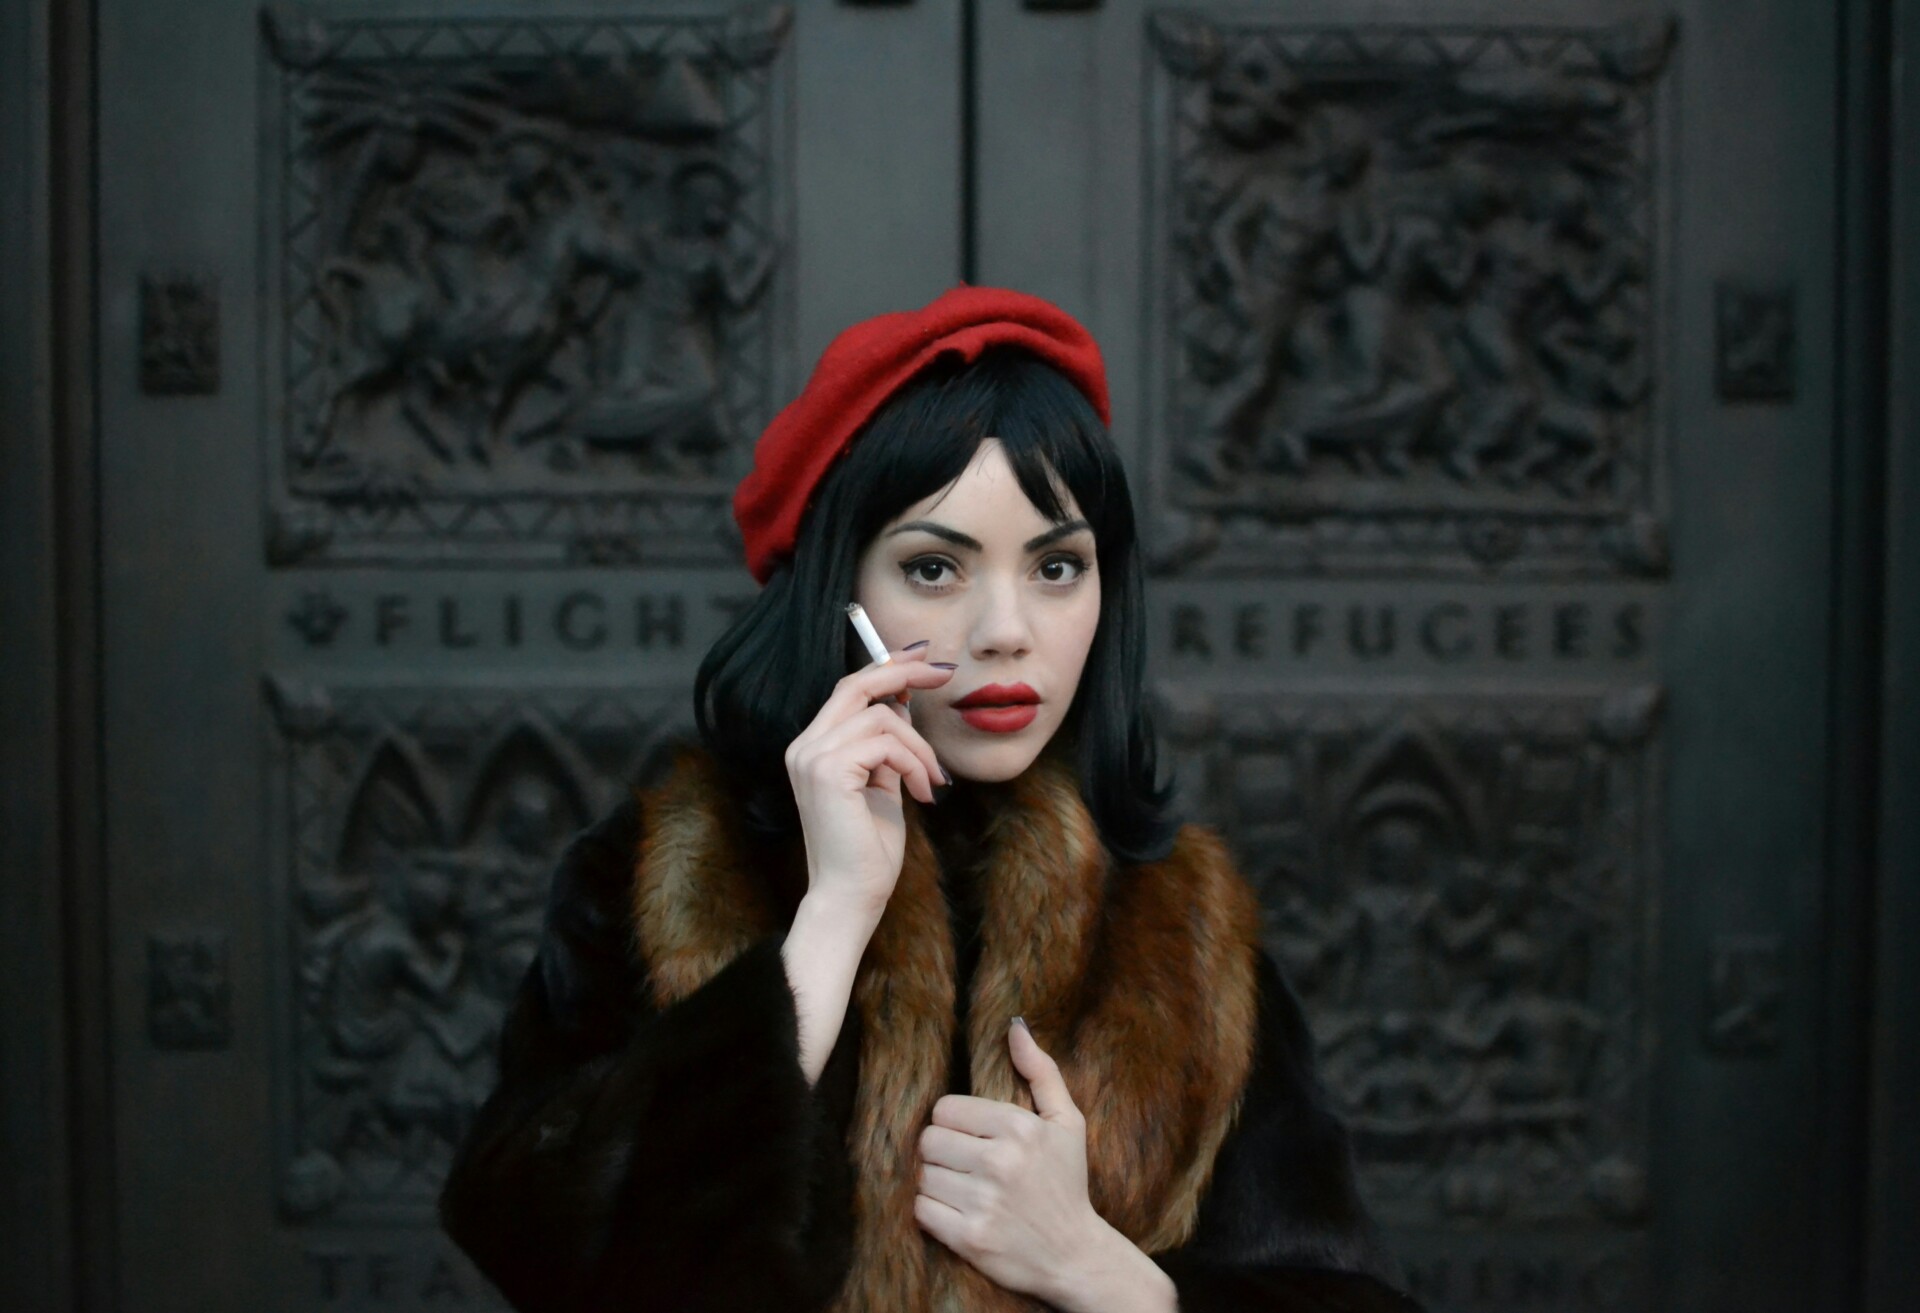 A french women in a red beret holding a cigarette